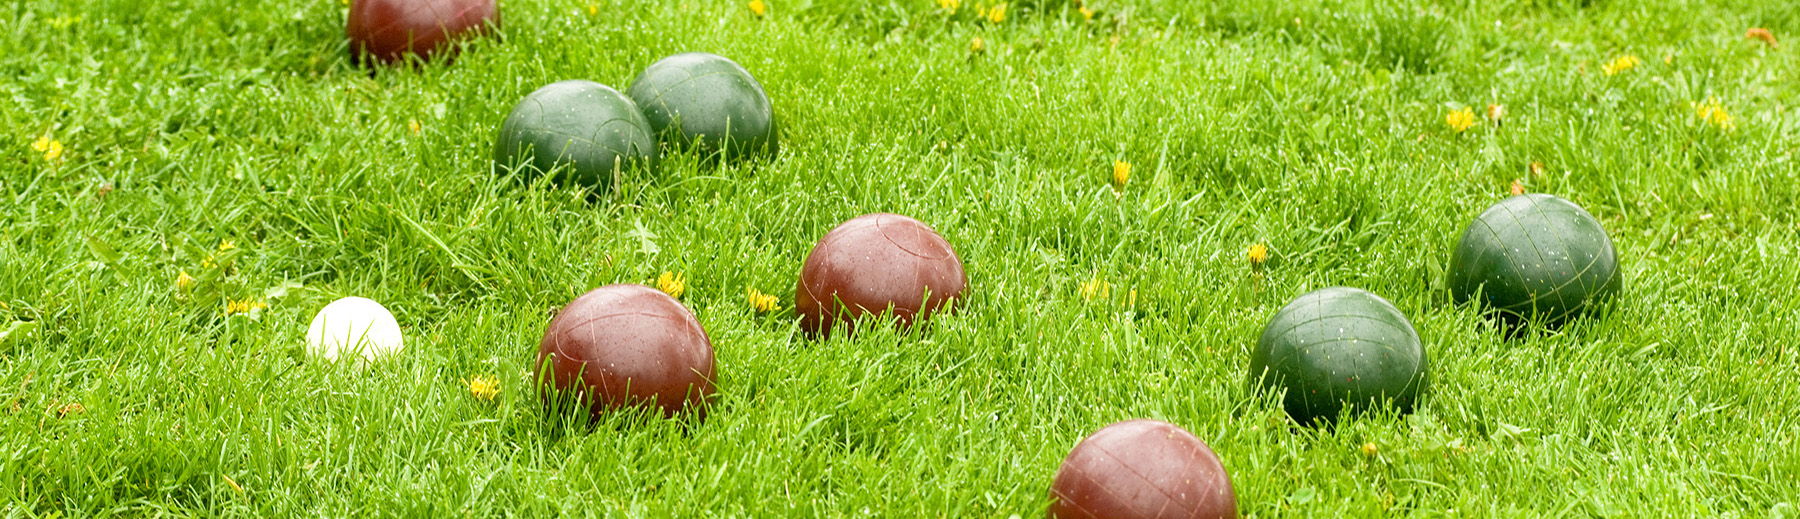 Bocce balls in the grass